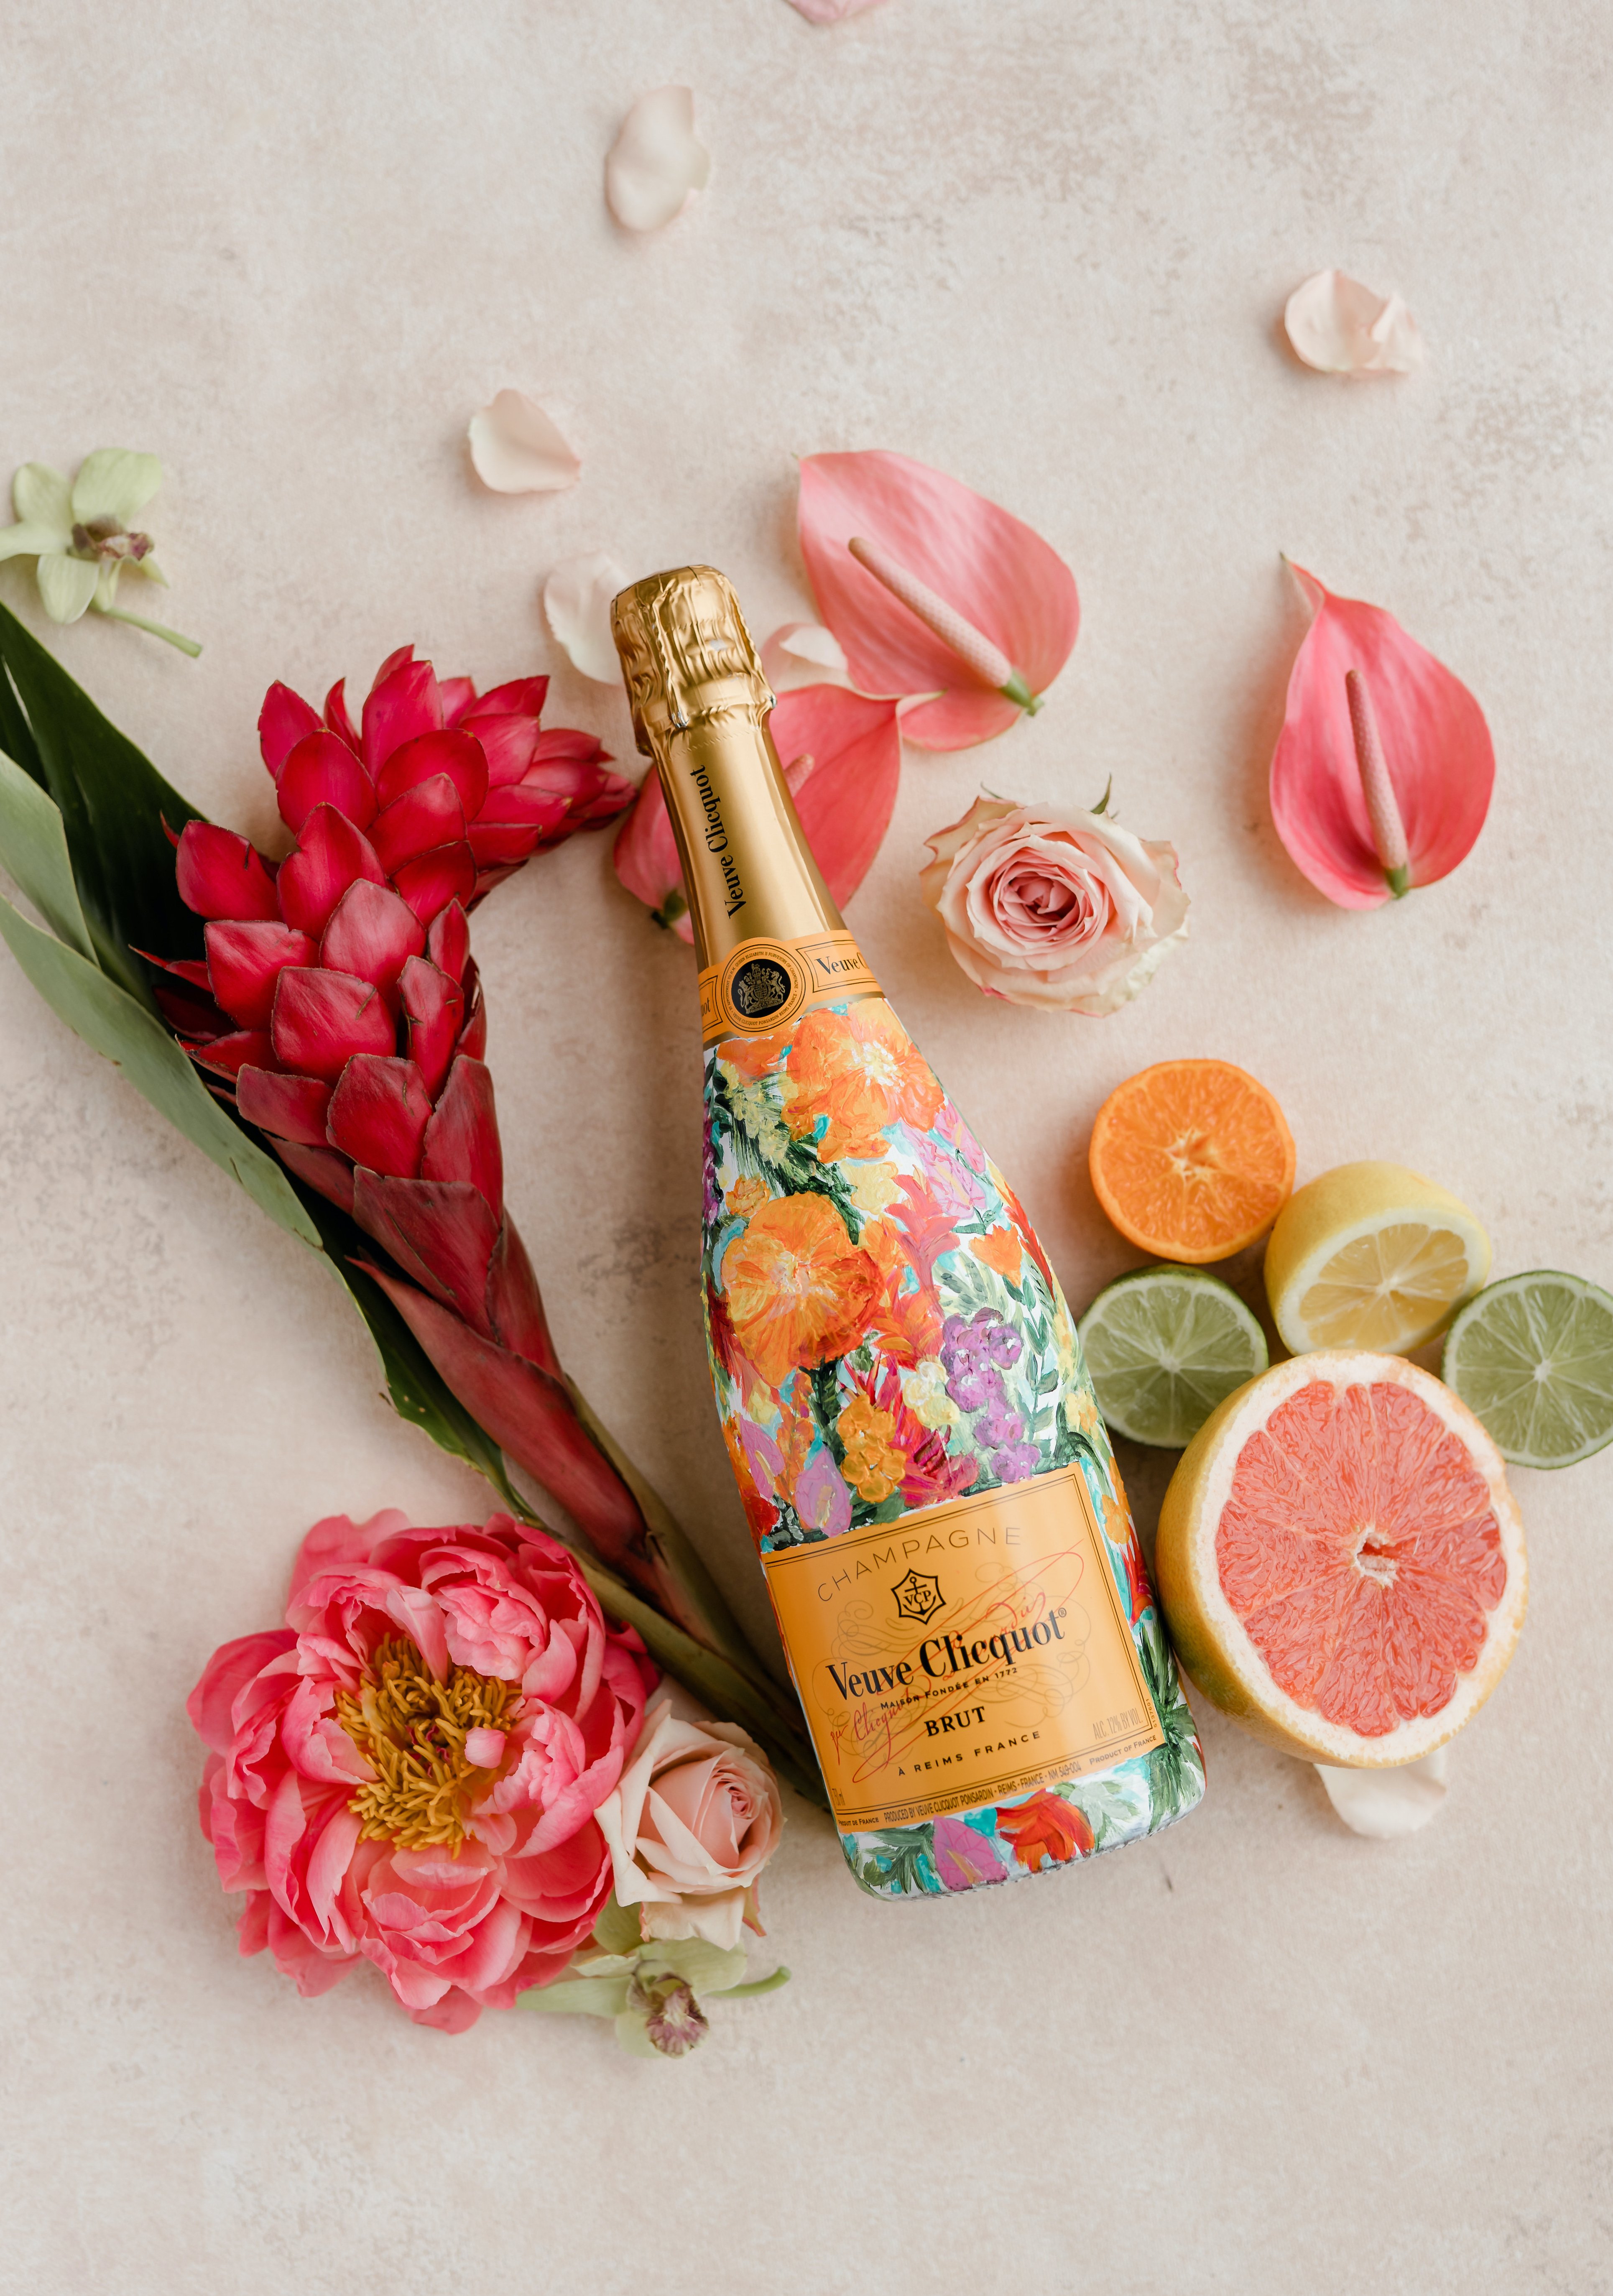 A handpainted champagne bottle is surrounded by citrus and tropical flowers.